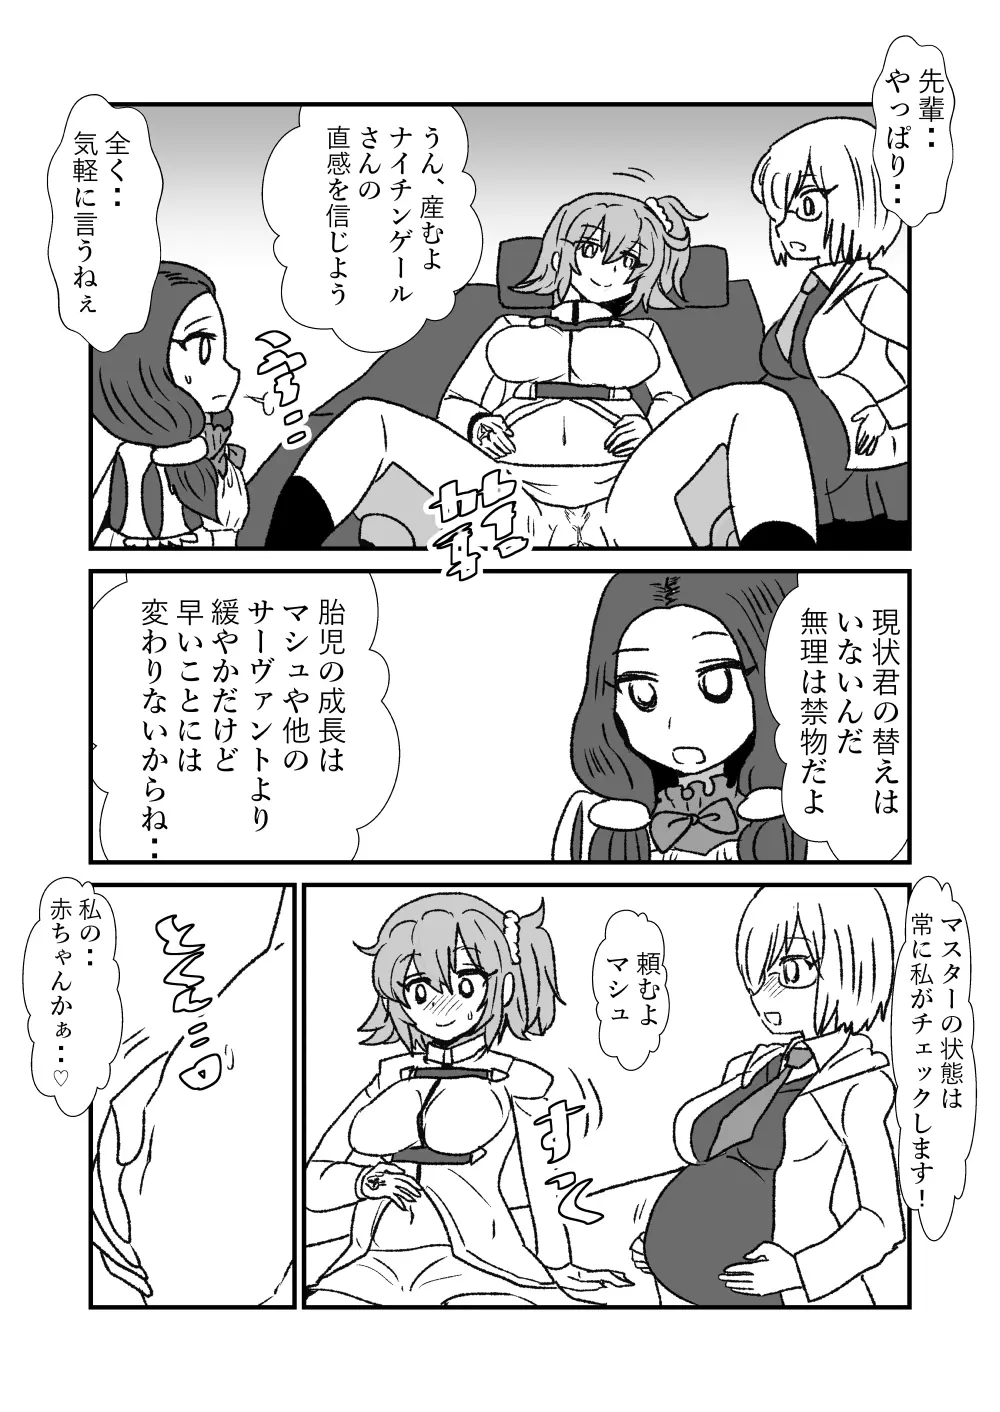 FPO~桃色林檎の種付け周回～ - page31